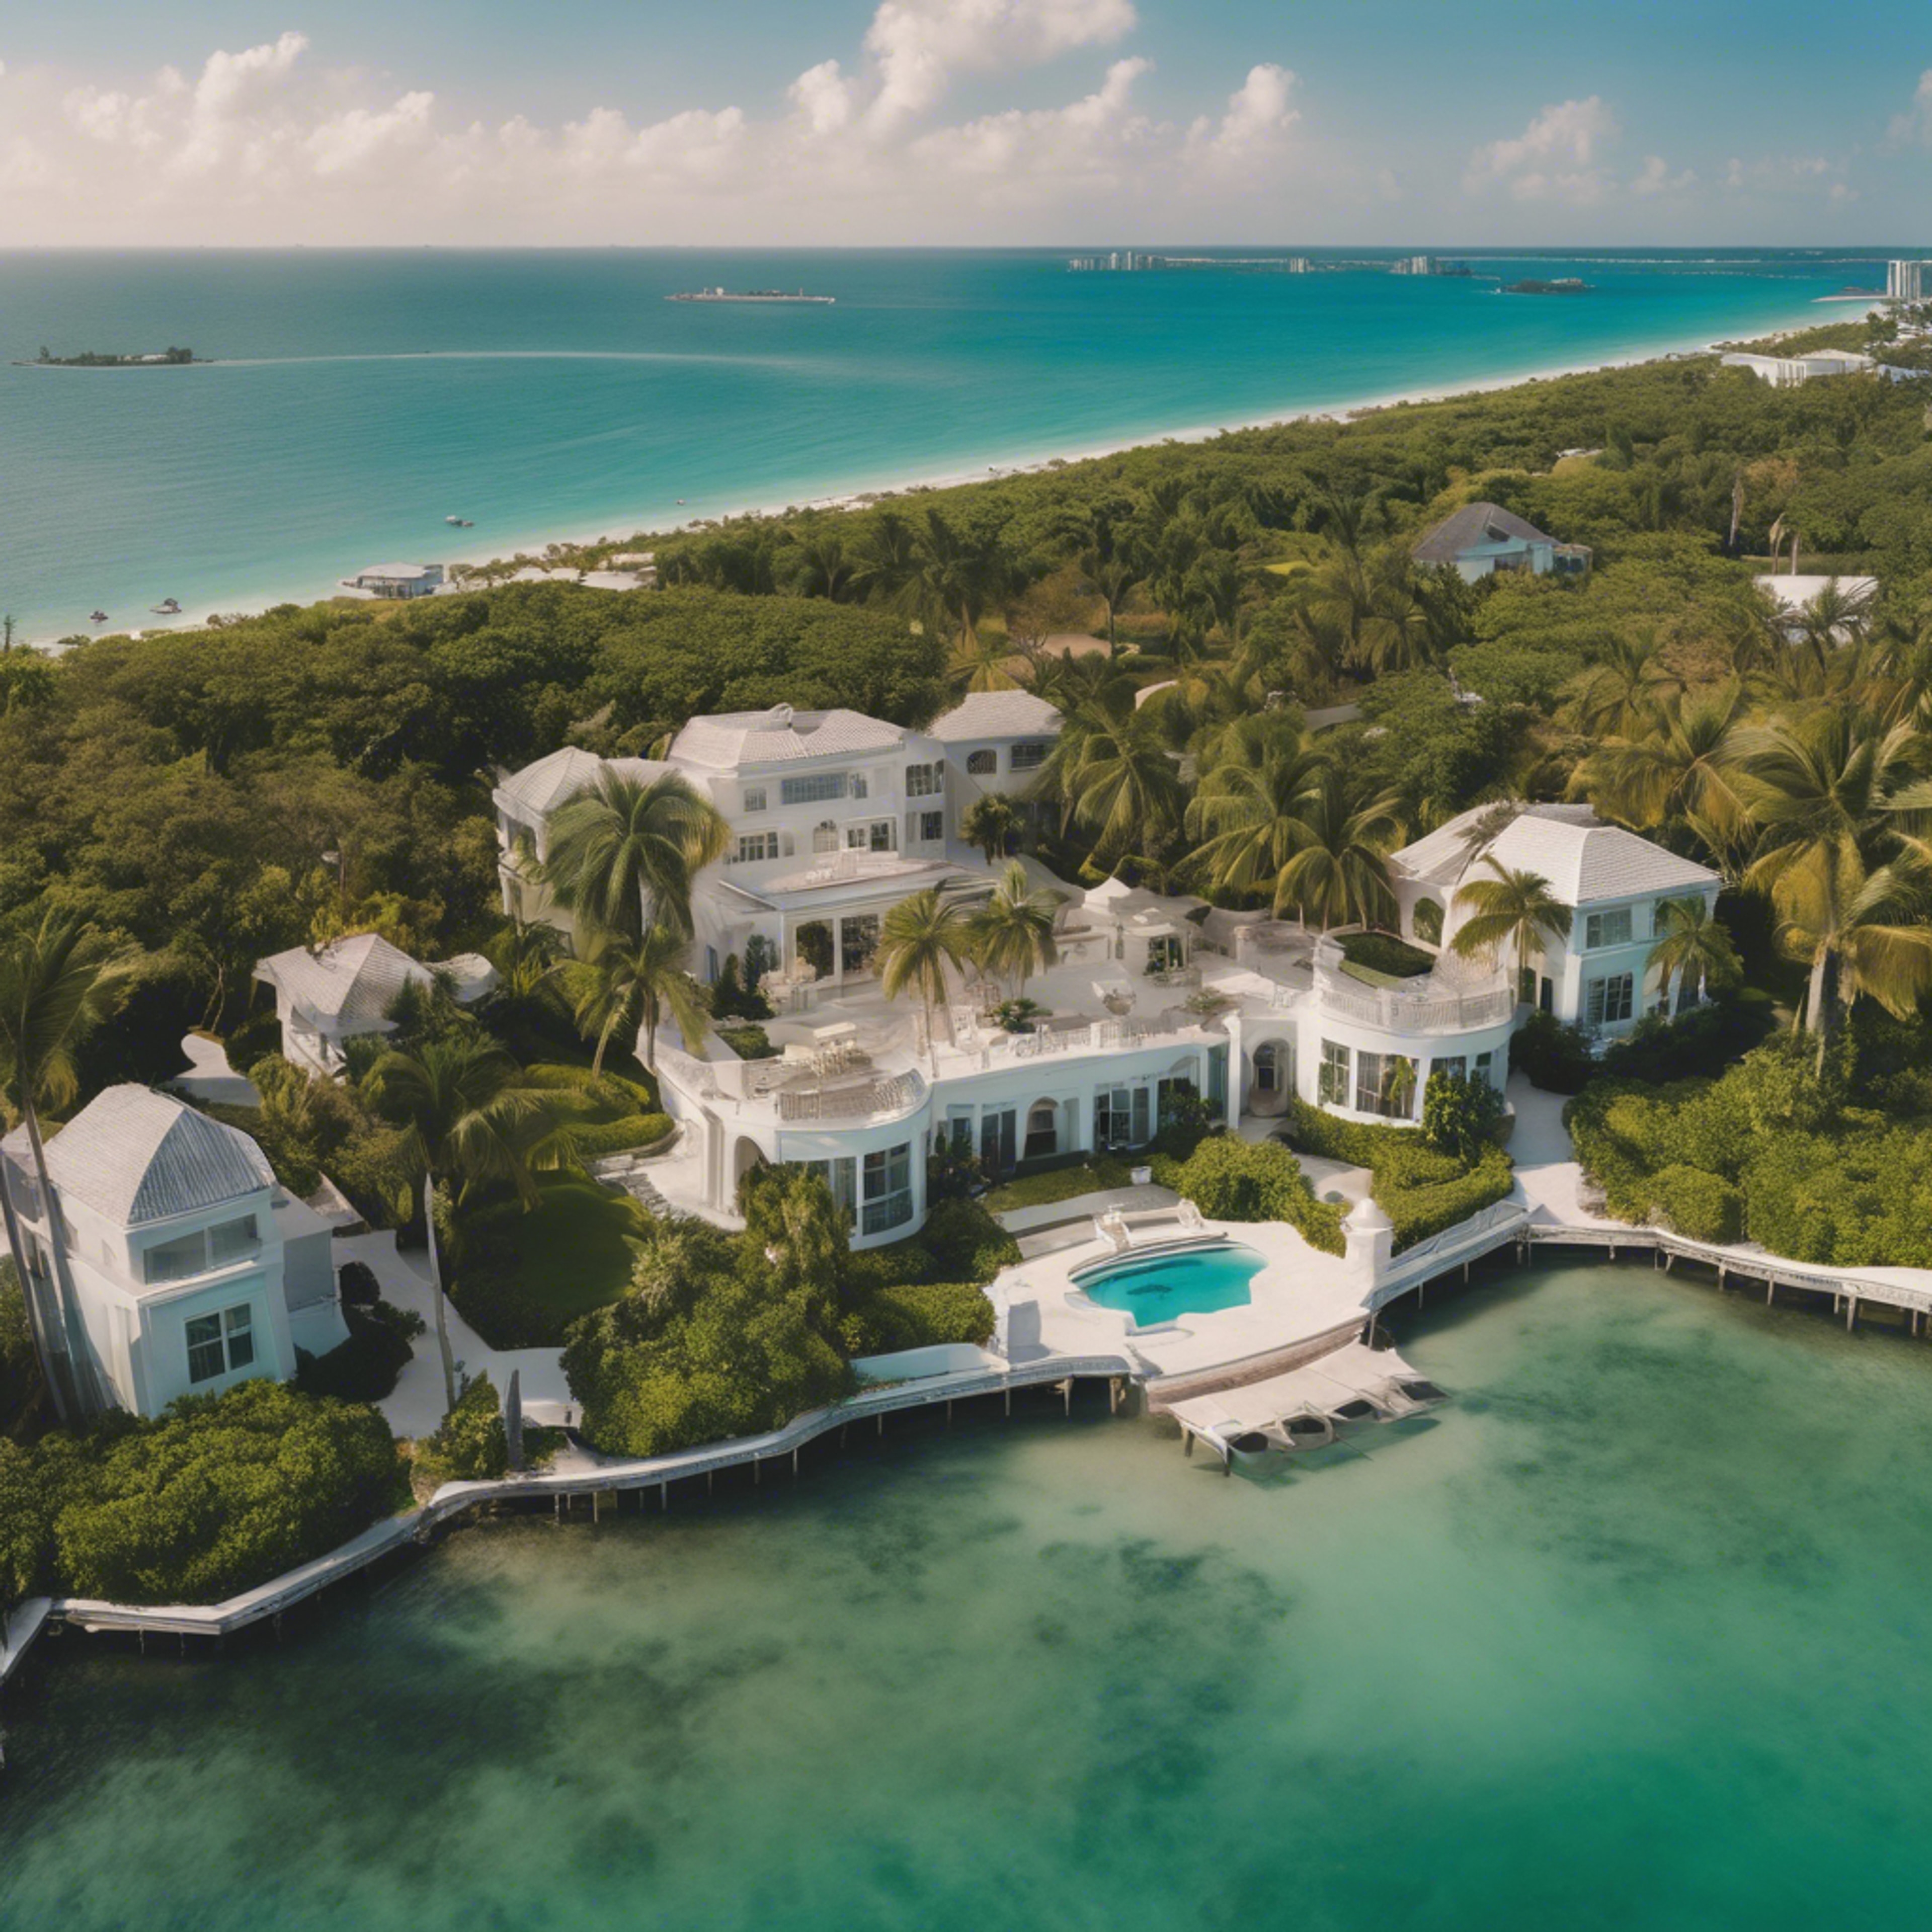 A panoramic aerial view of Star Island, Miami, showcasing the elegant homes and beautiful landscaping.壁紙[db6d9a26b3d34ba3a8b6]